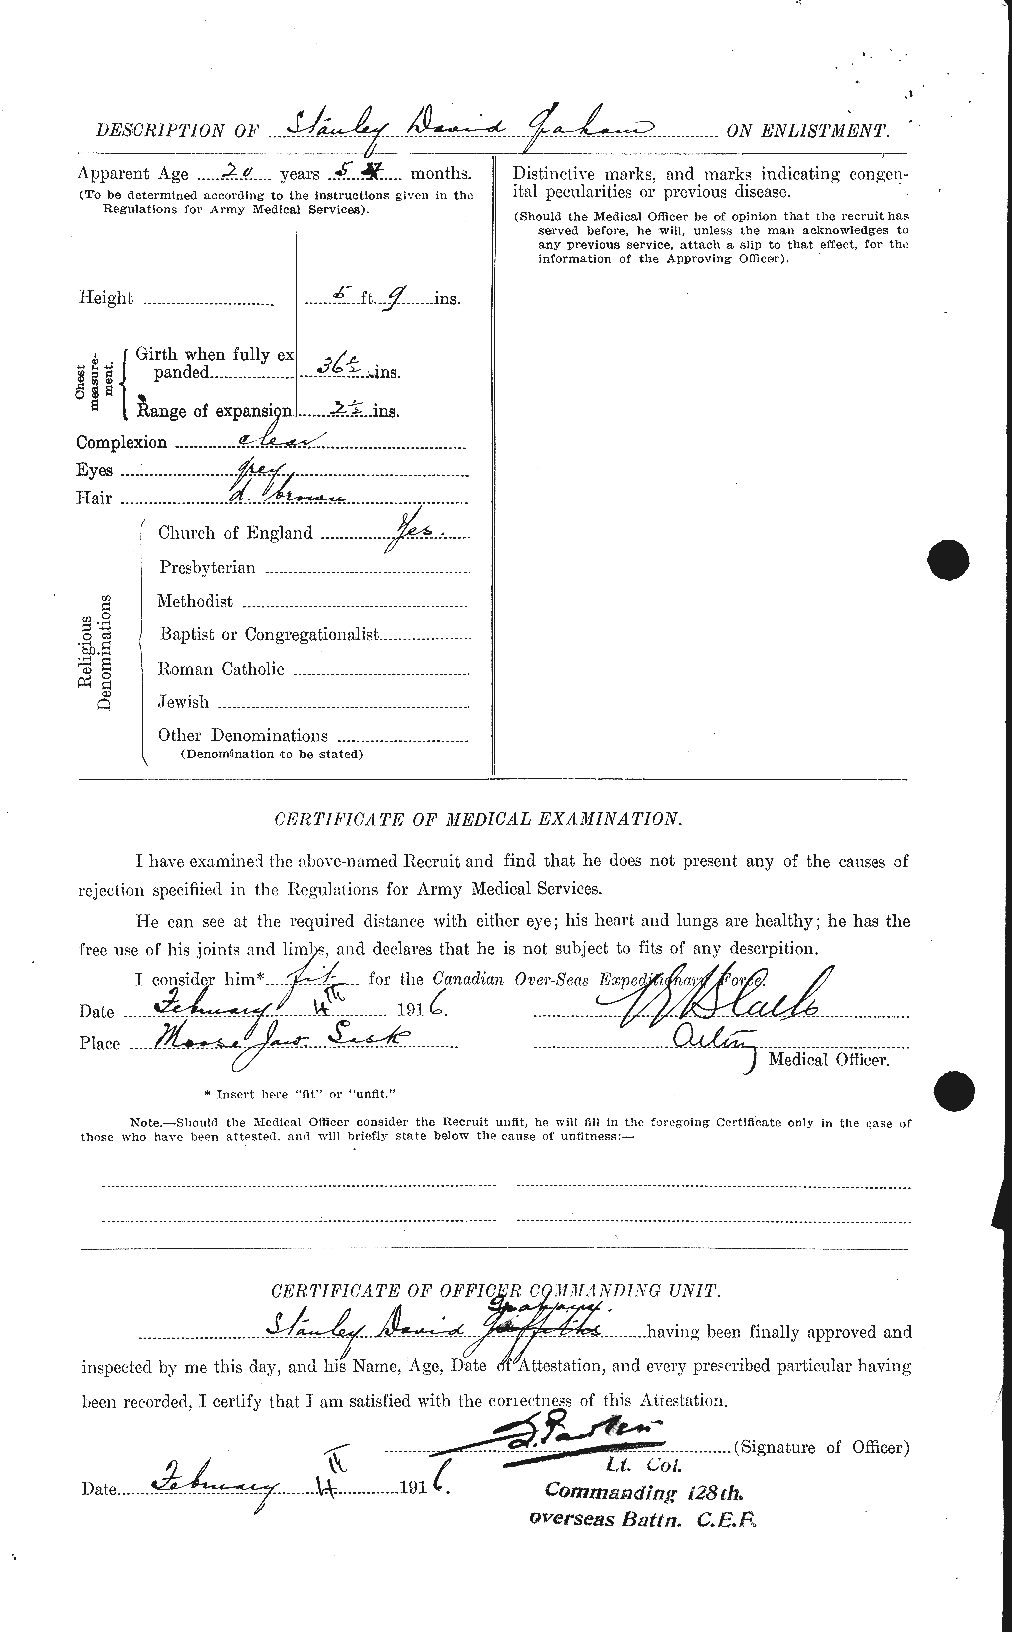 Personnel Records of the First World War - CEF 359468b